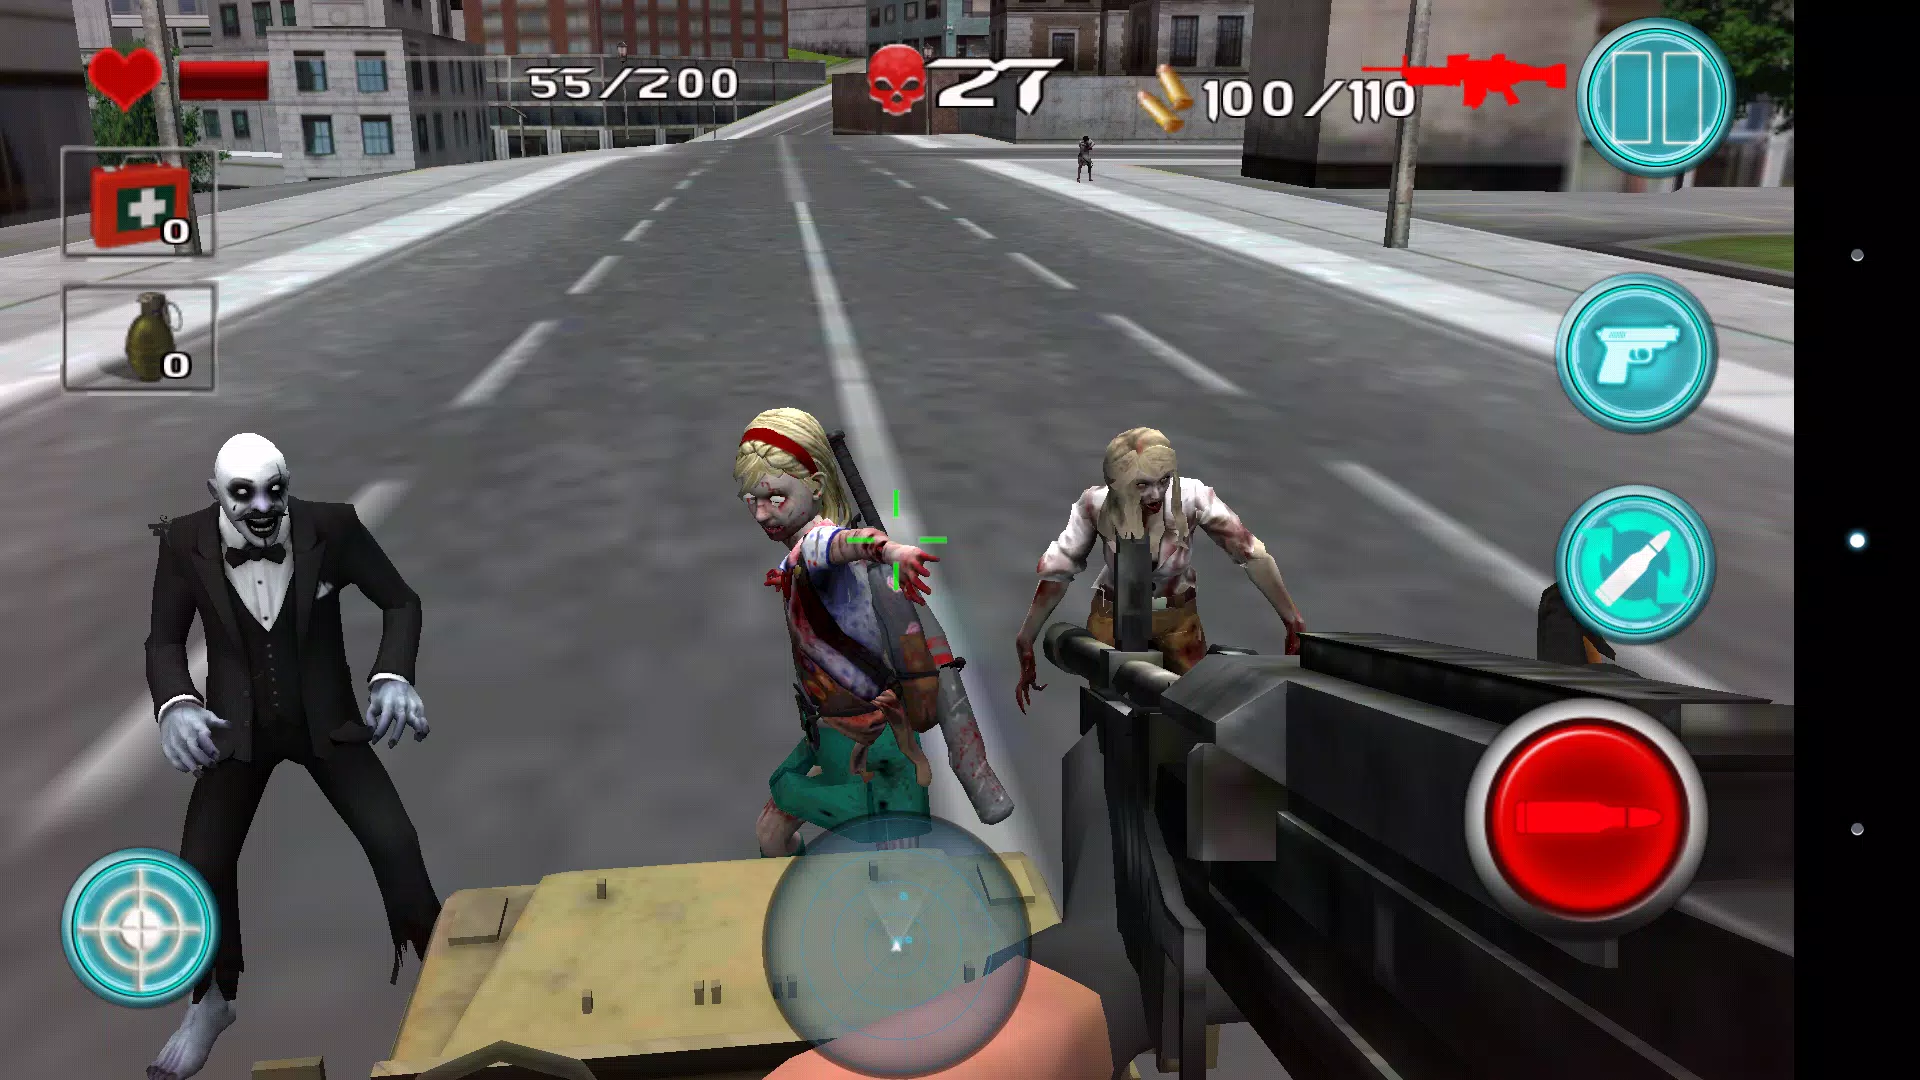 Escape From Zombie City for Android - APK Download